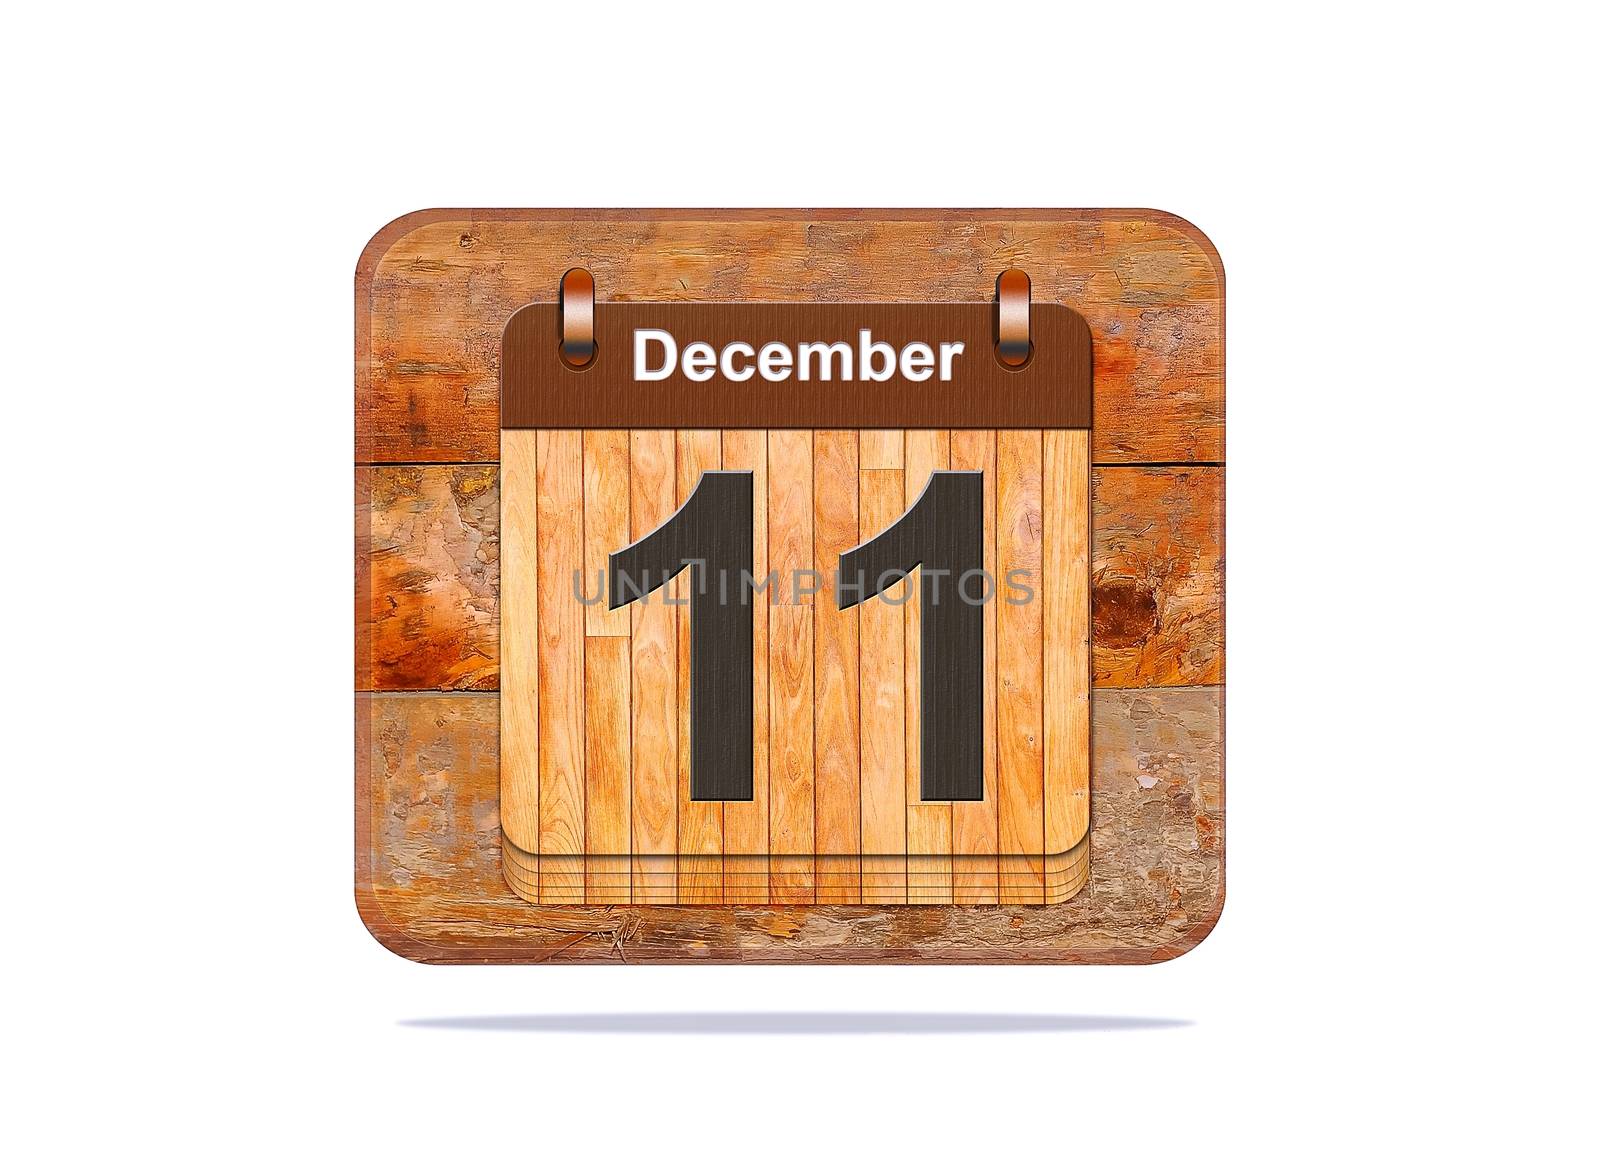 Calendar with the date of December 11.